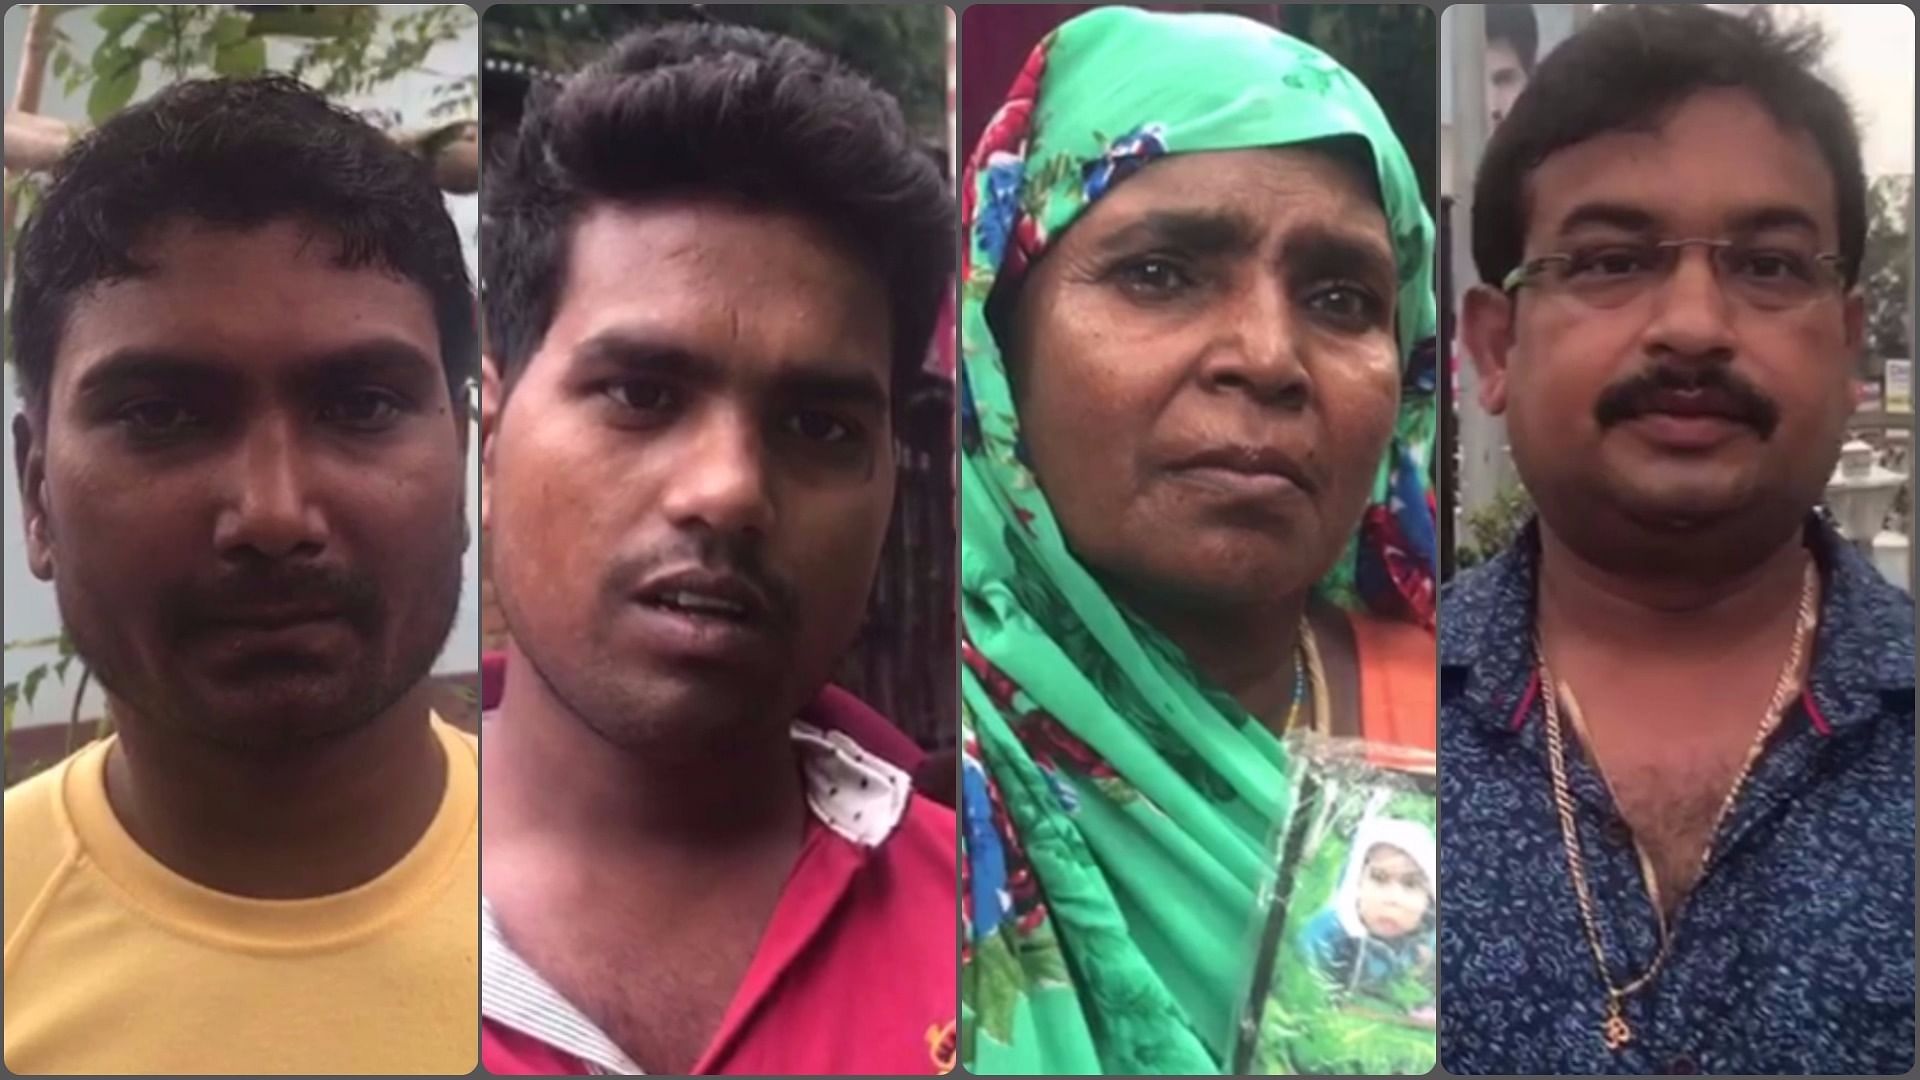 

The Quint spoke to the families of deceased children and residents of Ekla village to get a sense of the situation